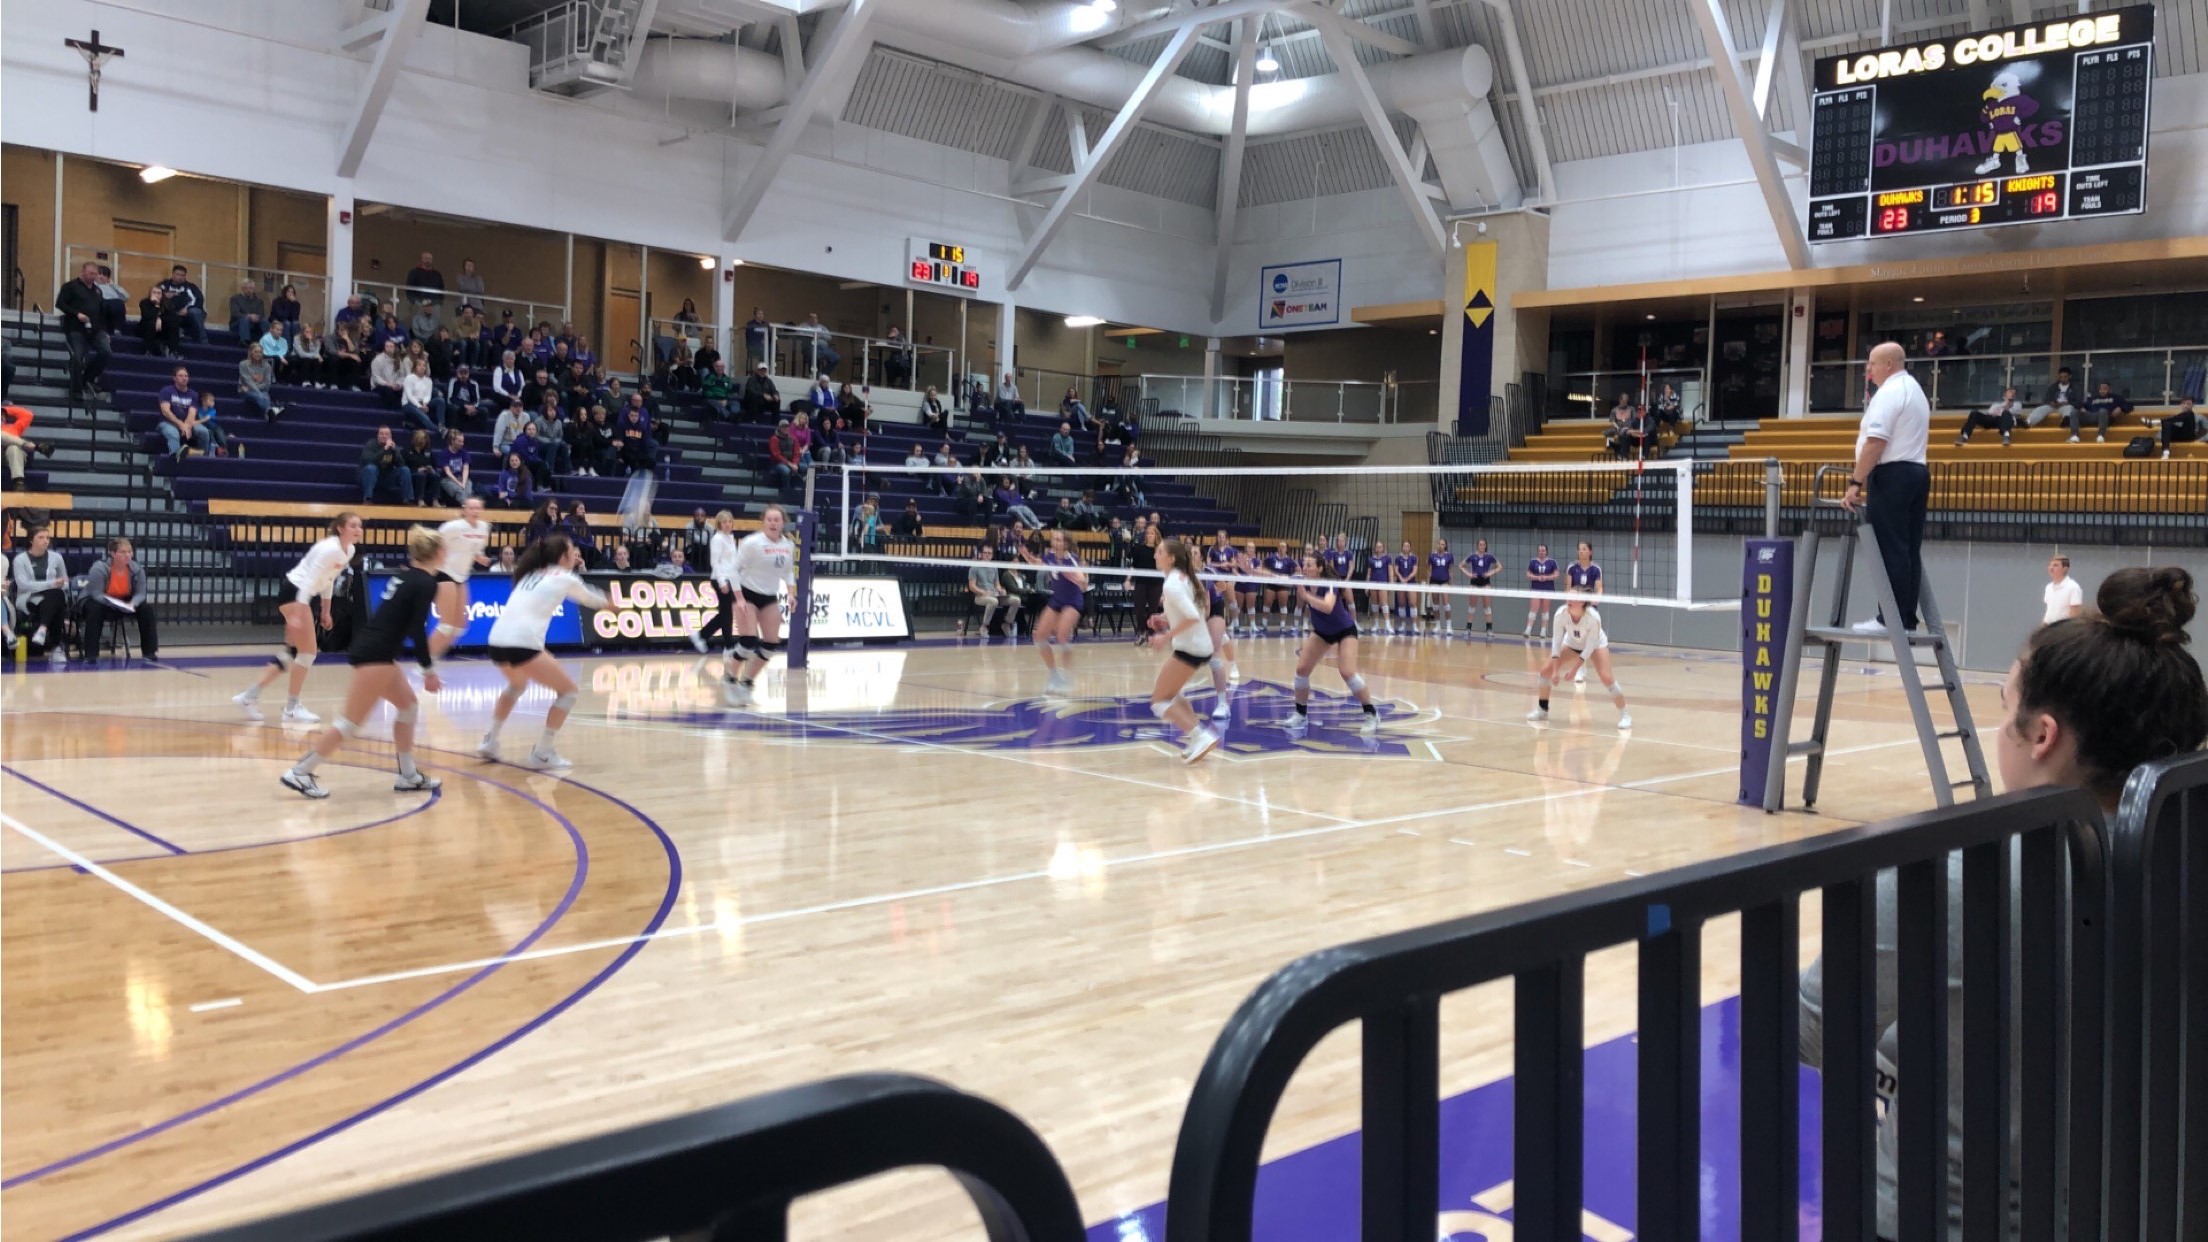 Heres a picture at Lillis court for a Duhawk Volleyball game